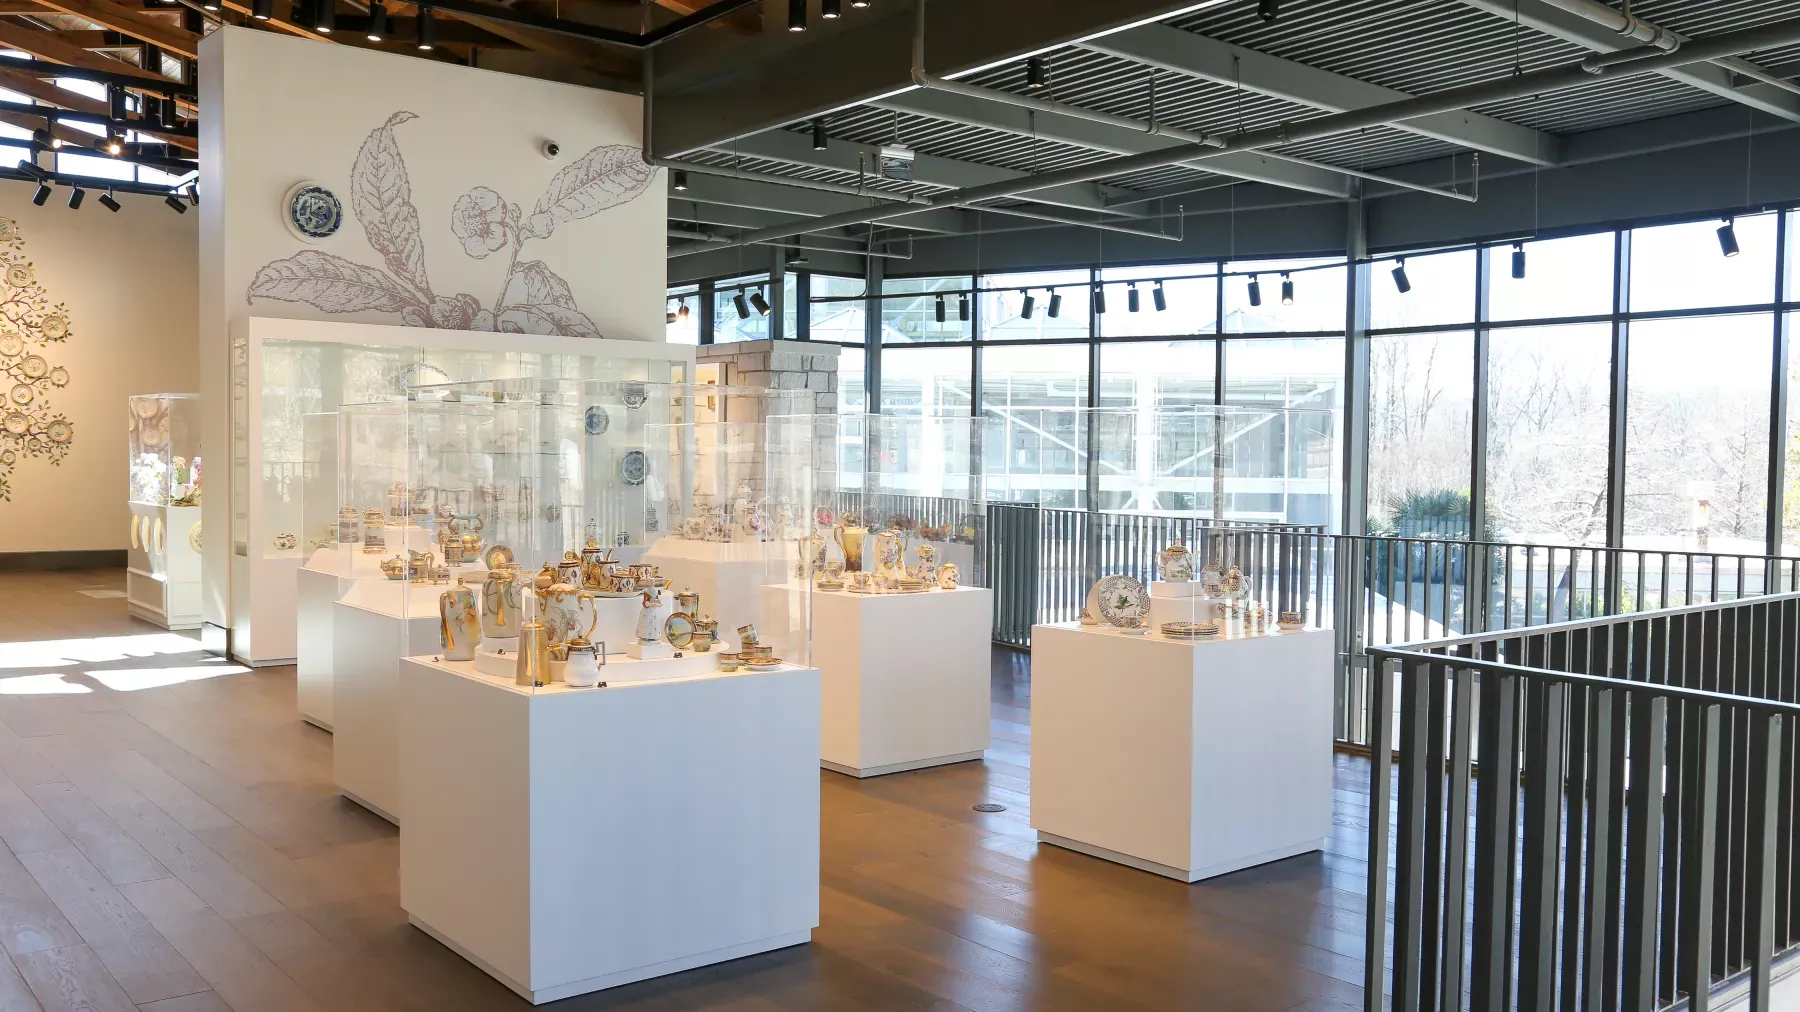 A well-lit museum exhibit featuring various pieces of ceramic art displayed on white pedestals within glass cases. The room has large windows allowing natural light to illuminate the space, wooden floors, and decorative wall art in the background.